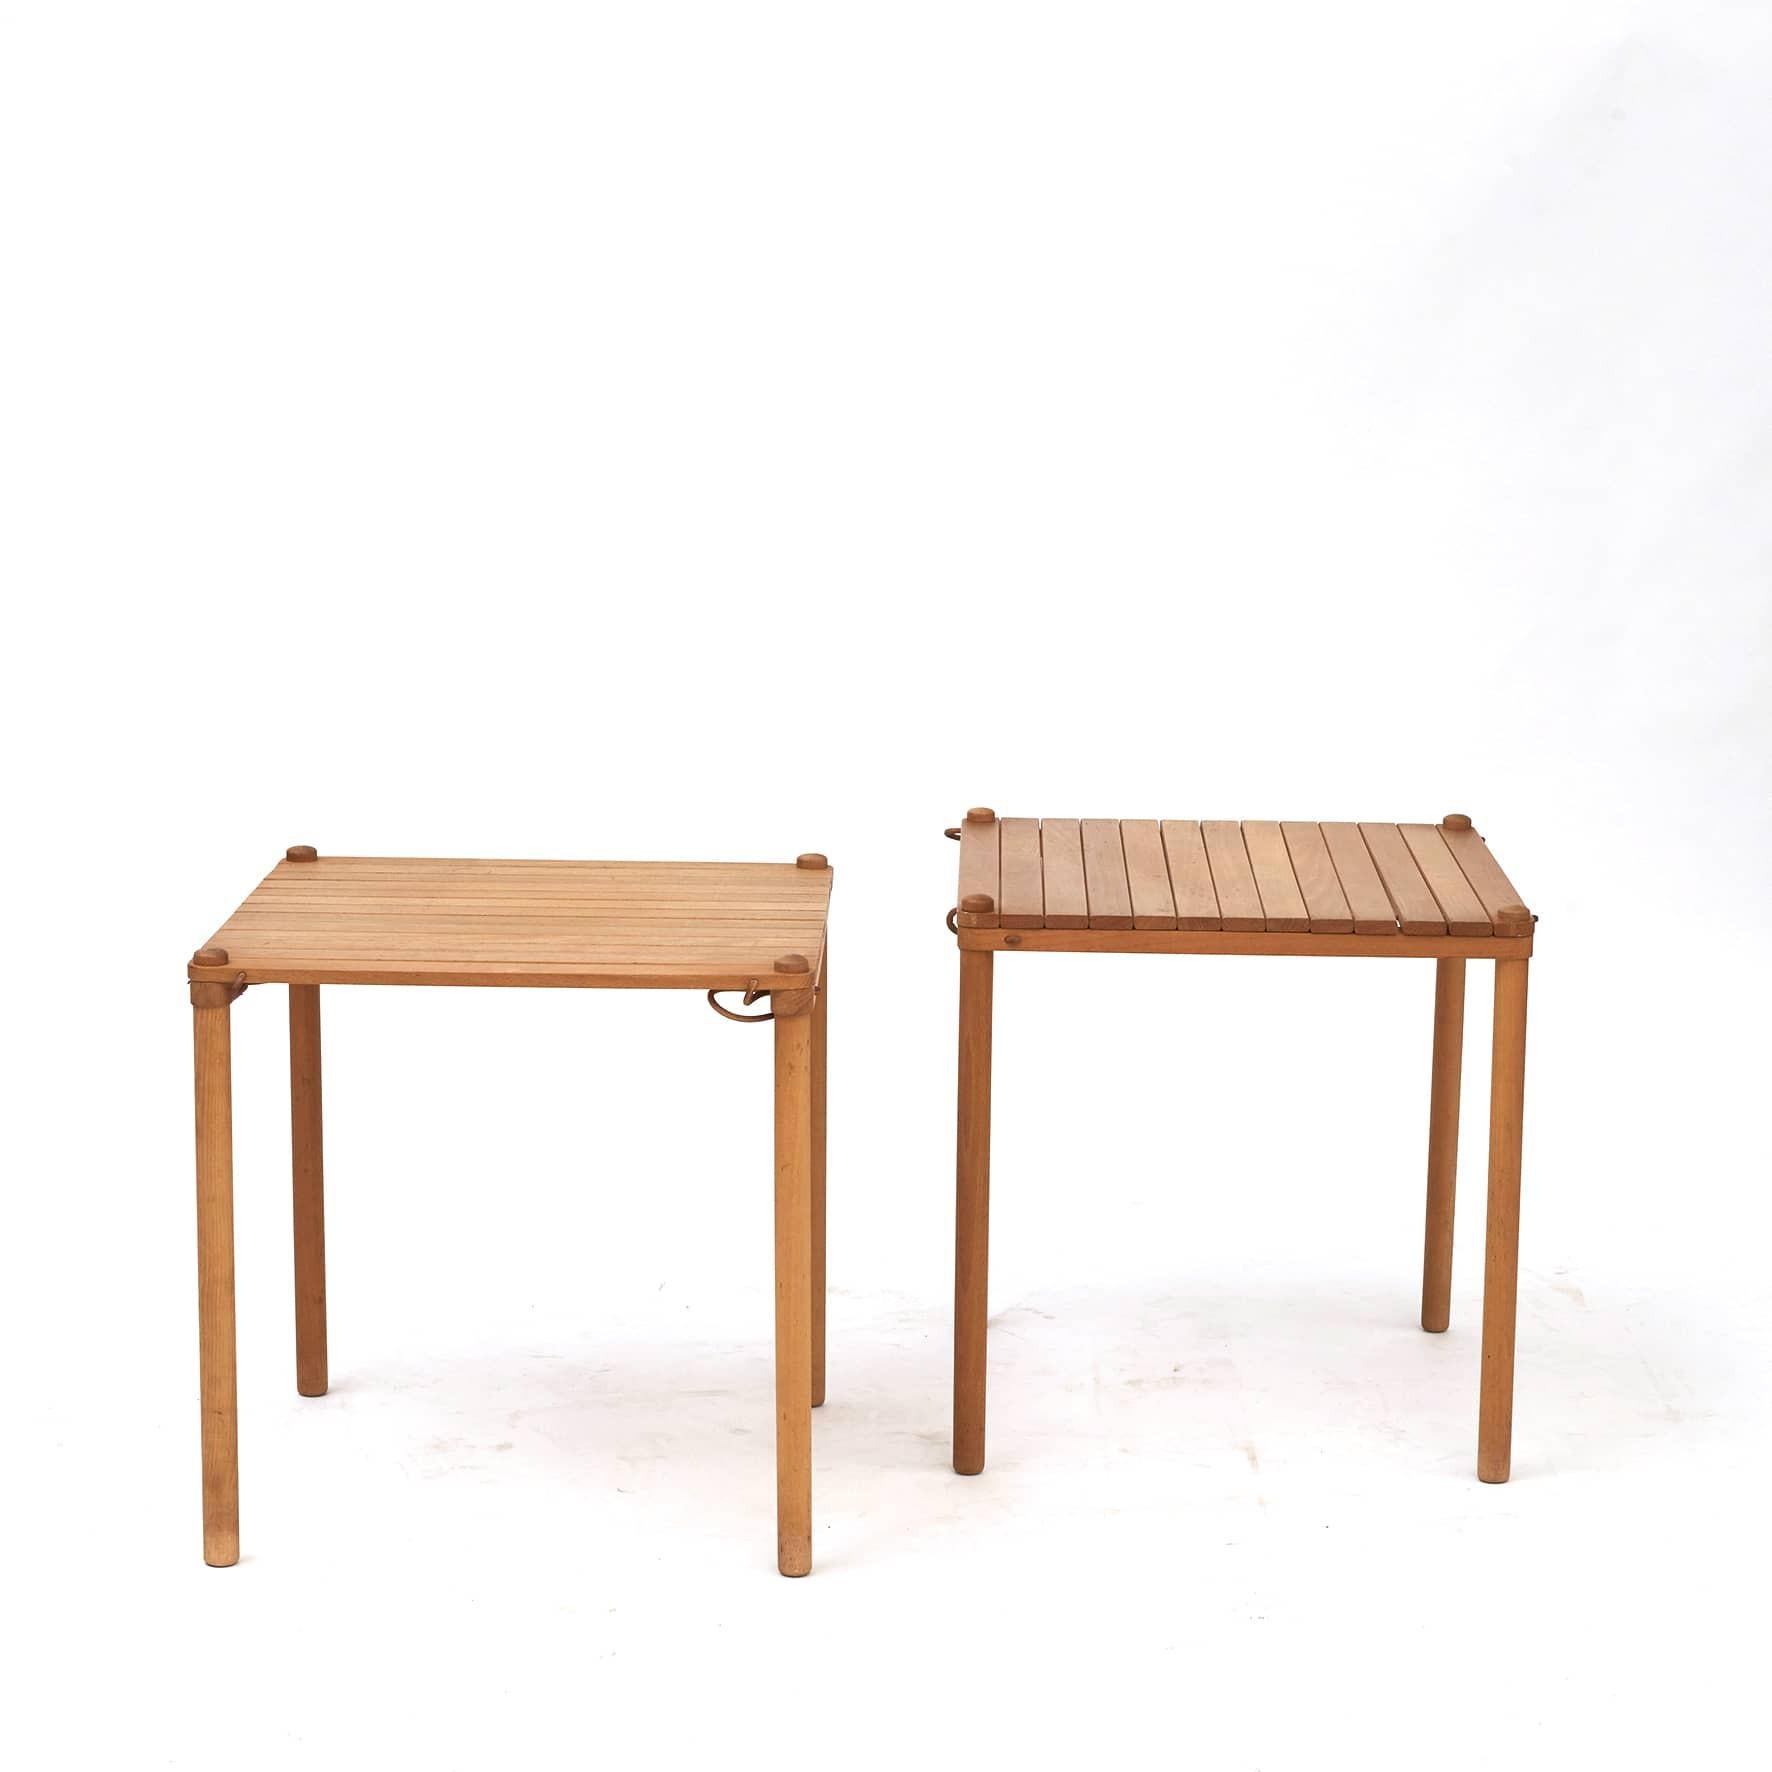 Axel Thygesen (1927-1976), architect and furniture designer.
Pair of tables, model at-54, designed by Axel Thygesen.
Made from beech with leather strings.
Easy to disassemble / assemble.

Manufactured by Interna, 1965.
Original untouched